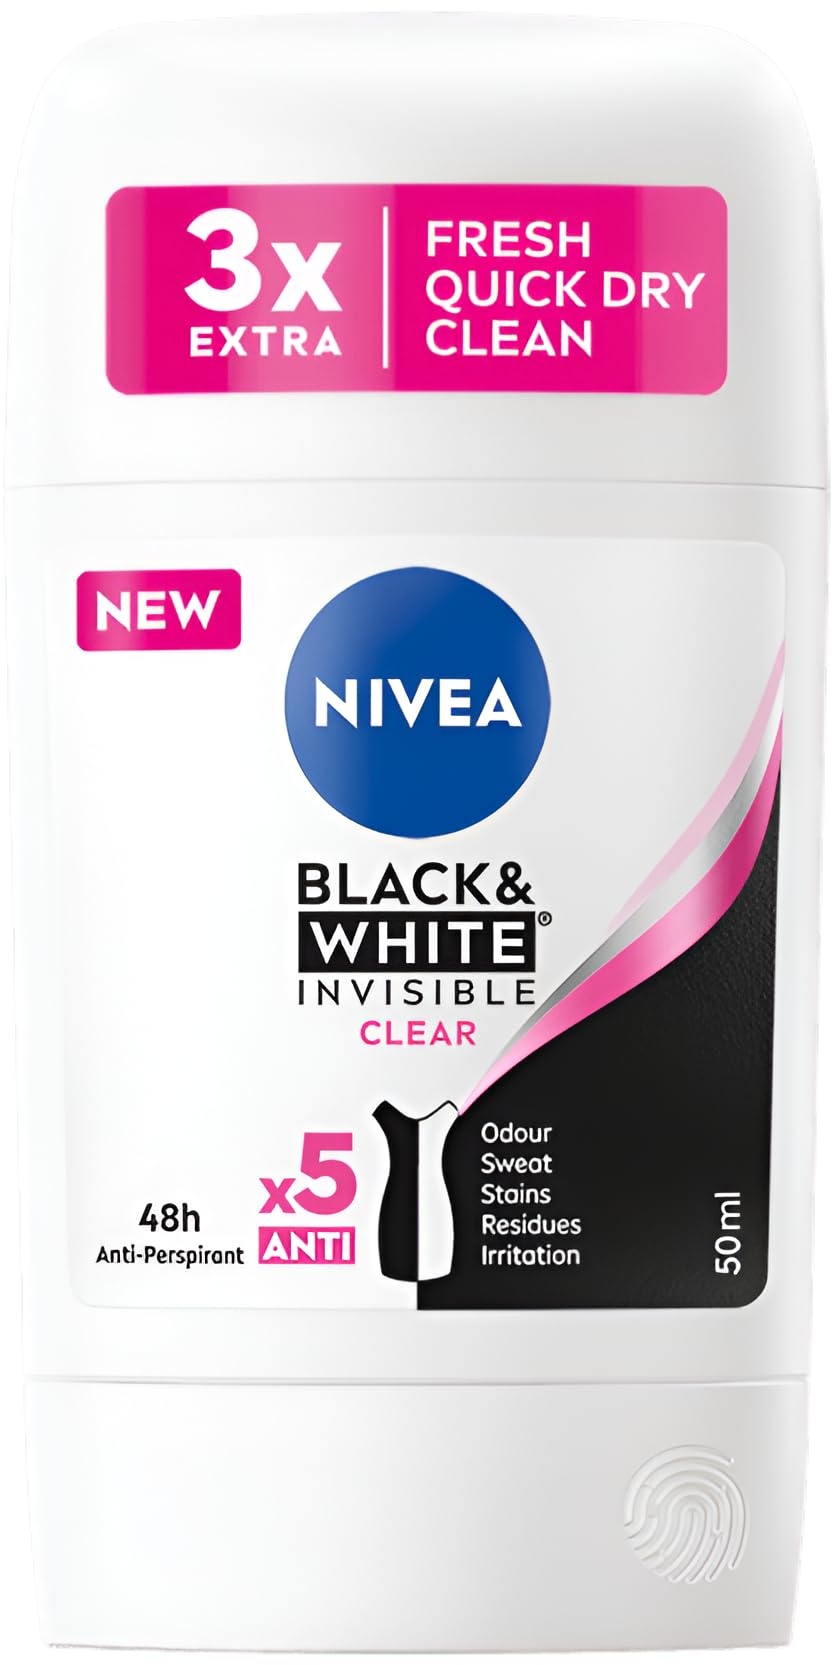 NIVEA Black & White Clear Anti-perspirant Stick Deodorant Women INVISIBLE BLACK AND WHITE CLEAR, Softer Texture For Smoother Application, Pack of 2, 2 x 50ML, 48H Protection